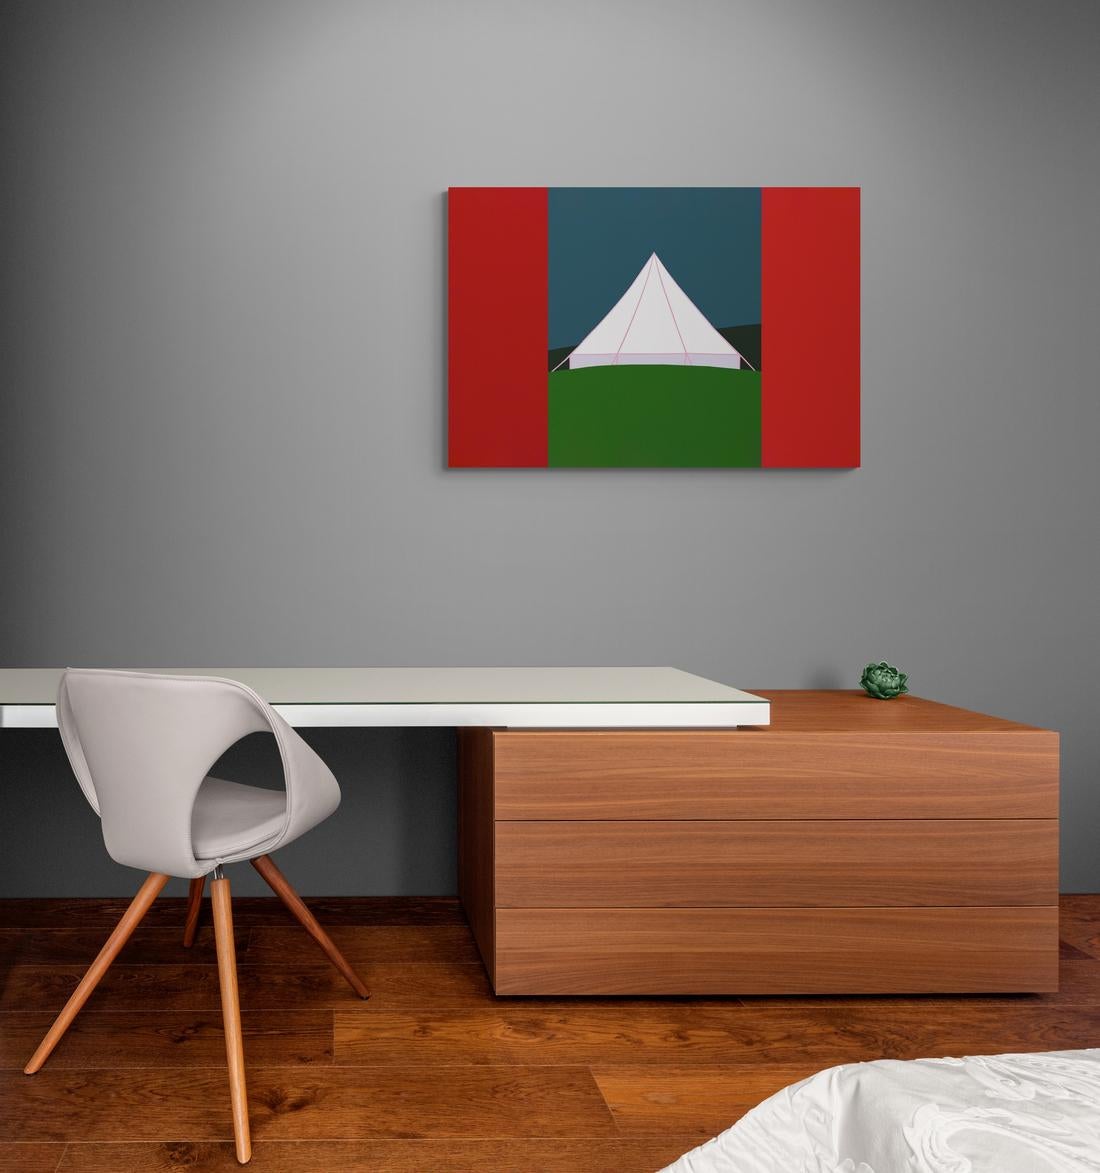 This particular painting is a play on the form of the Canadian flag, the military history of Canada, the journey implied by the use of the tent, and of course, the primary symbolism of the pyramid. In true Pachter form, he manages to challenge and